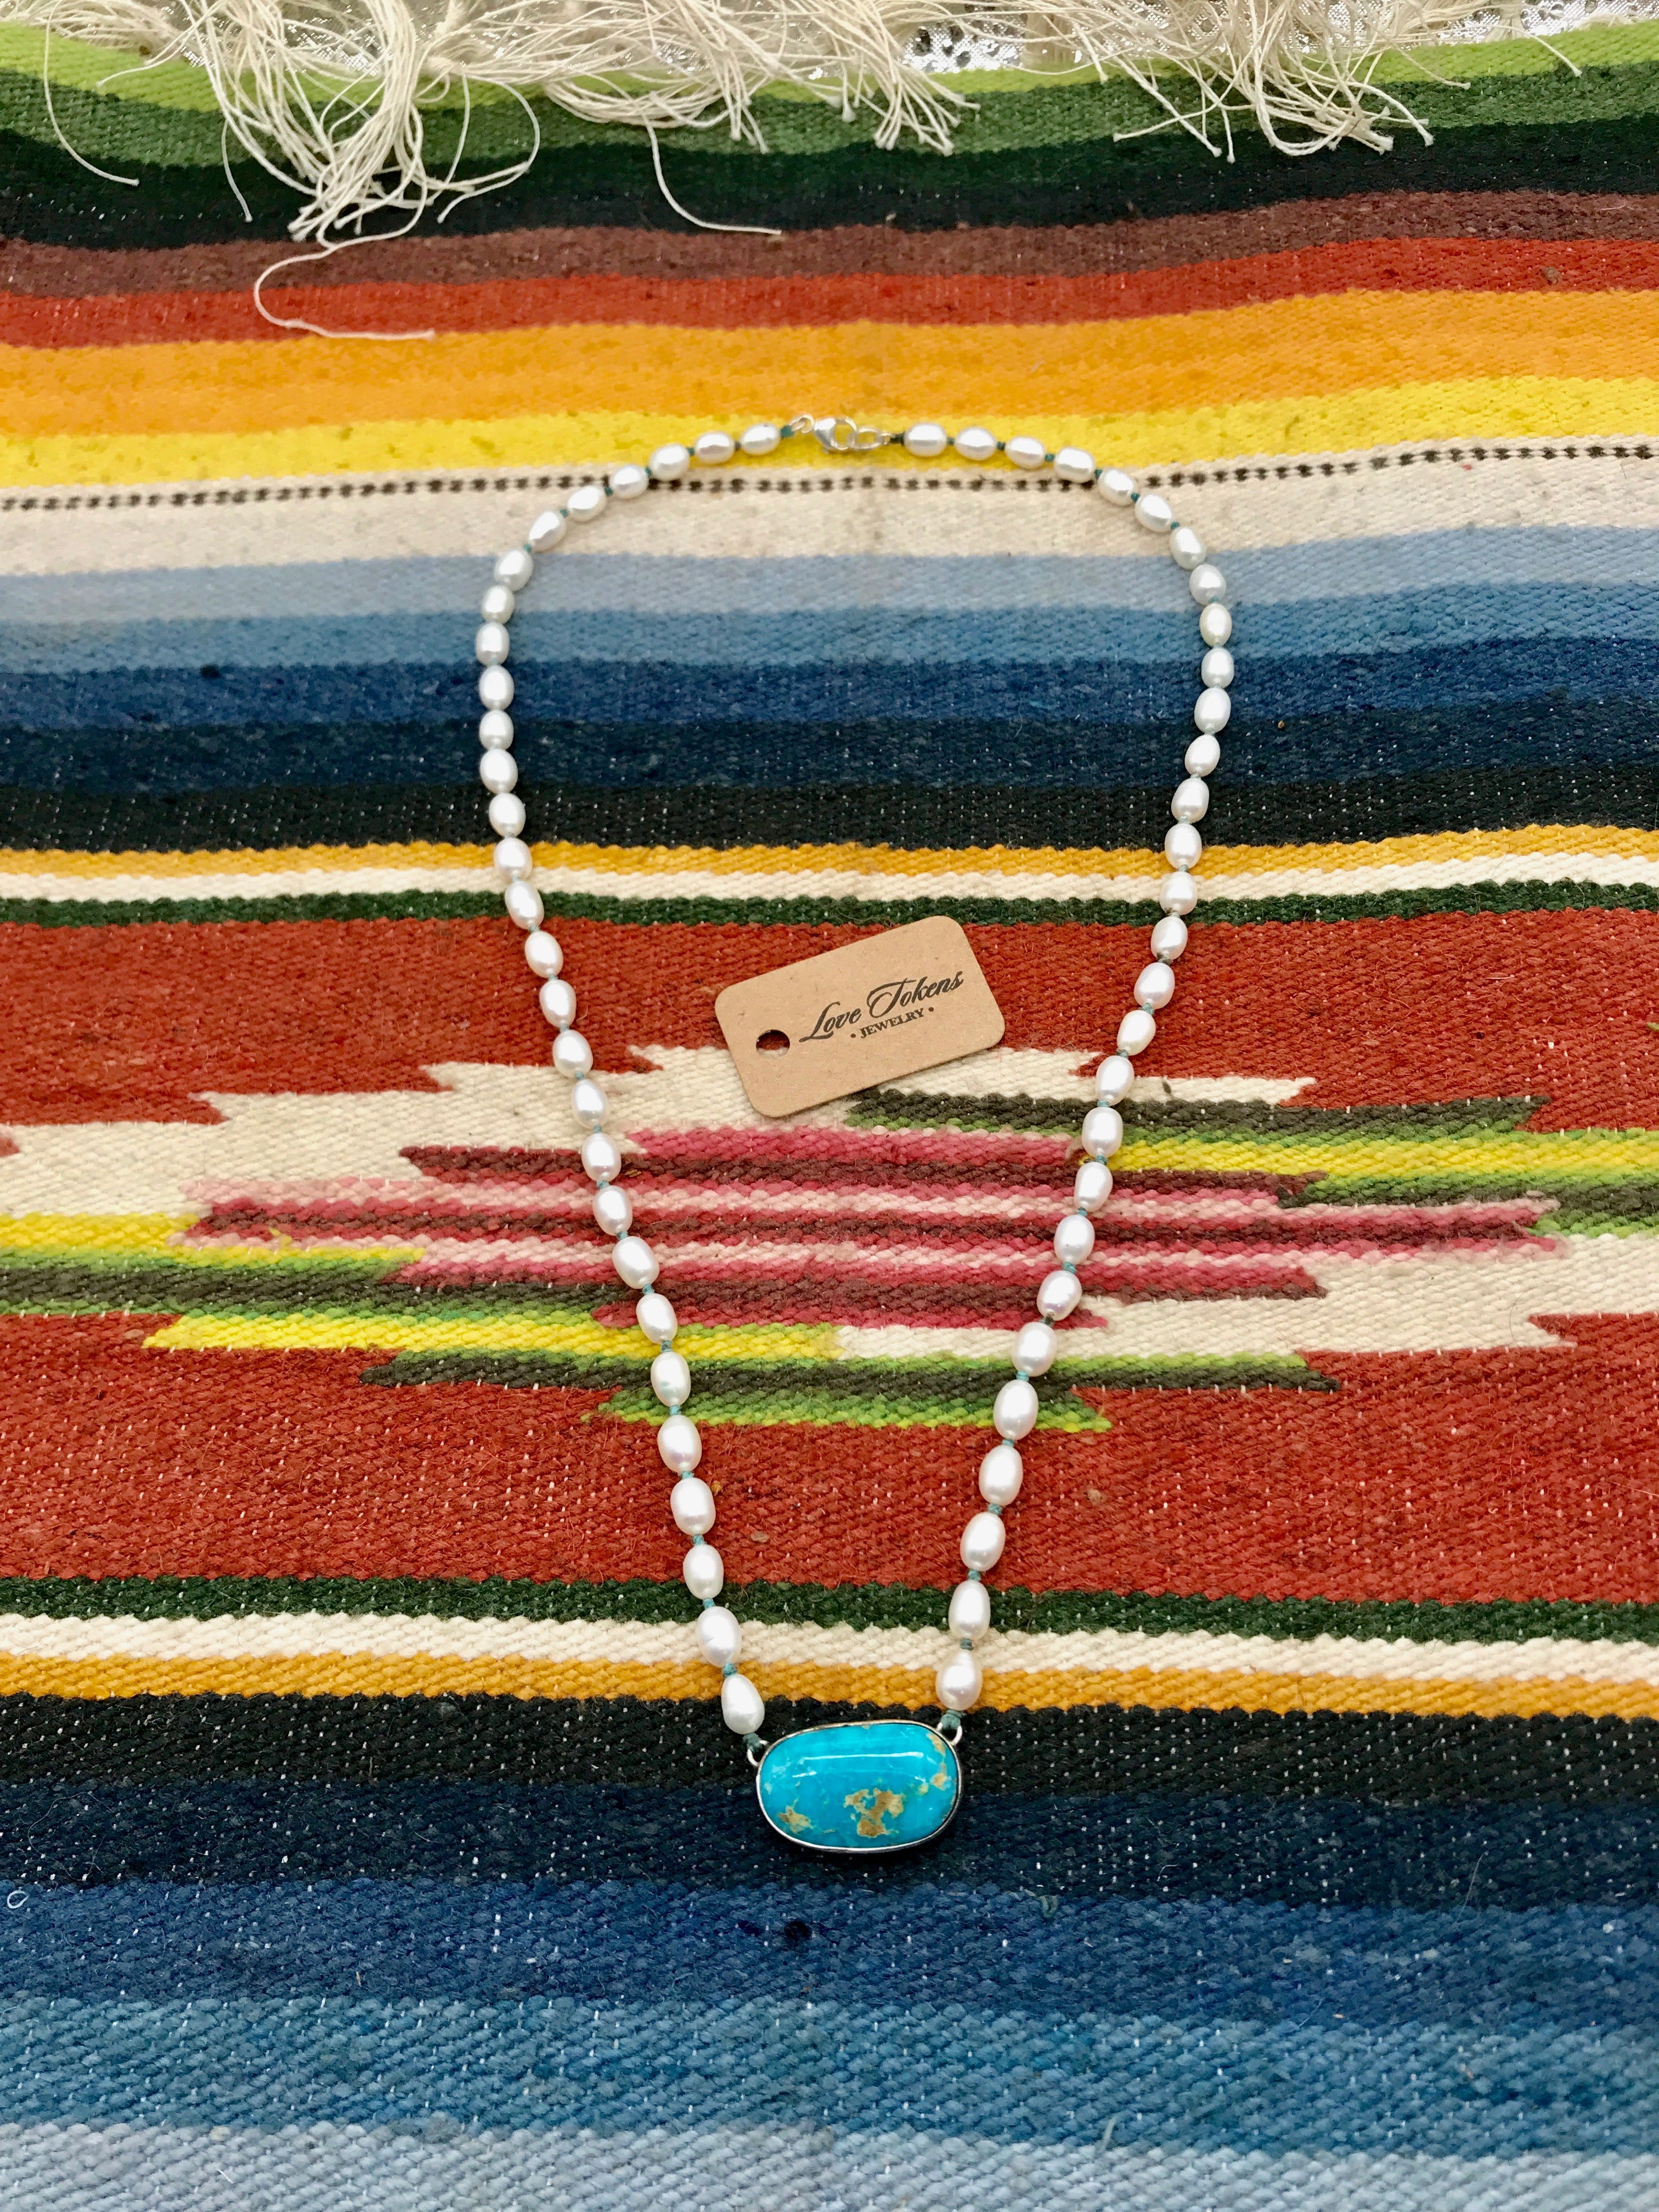 Pearl and Turquoise Necklace - LTJ Exclusive